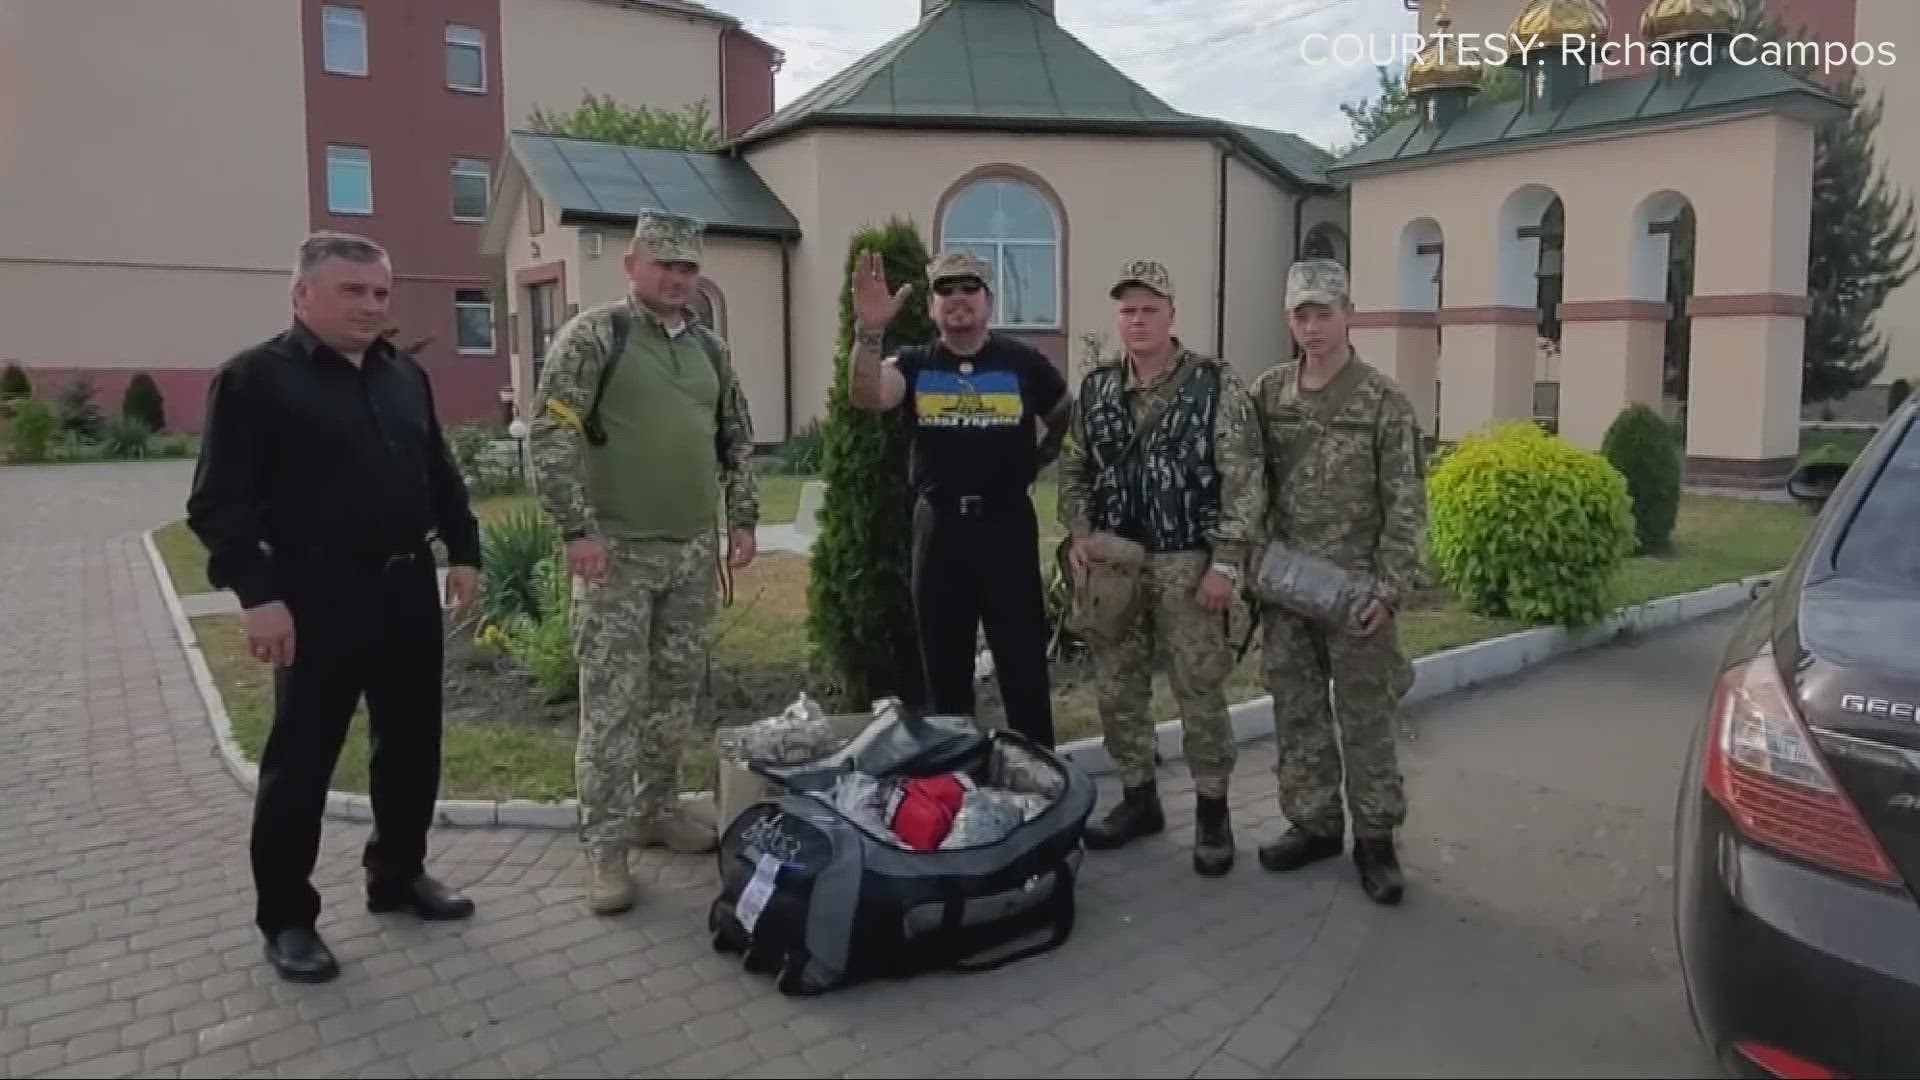 Marine Corps. veteran Richard Campos met with Ukrainian soldiers to ask what they needed. He listened and hit the ground running to collect tourniquets.